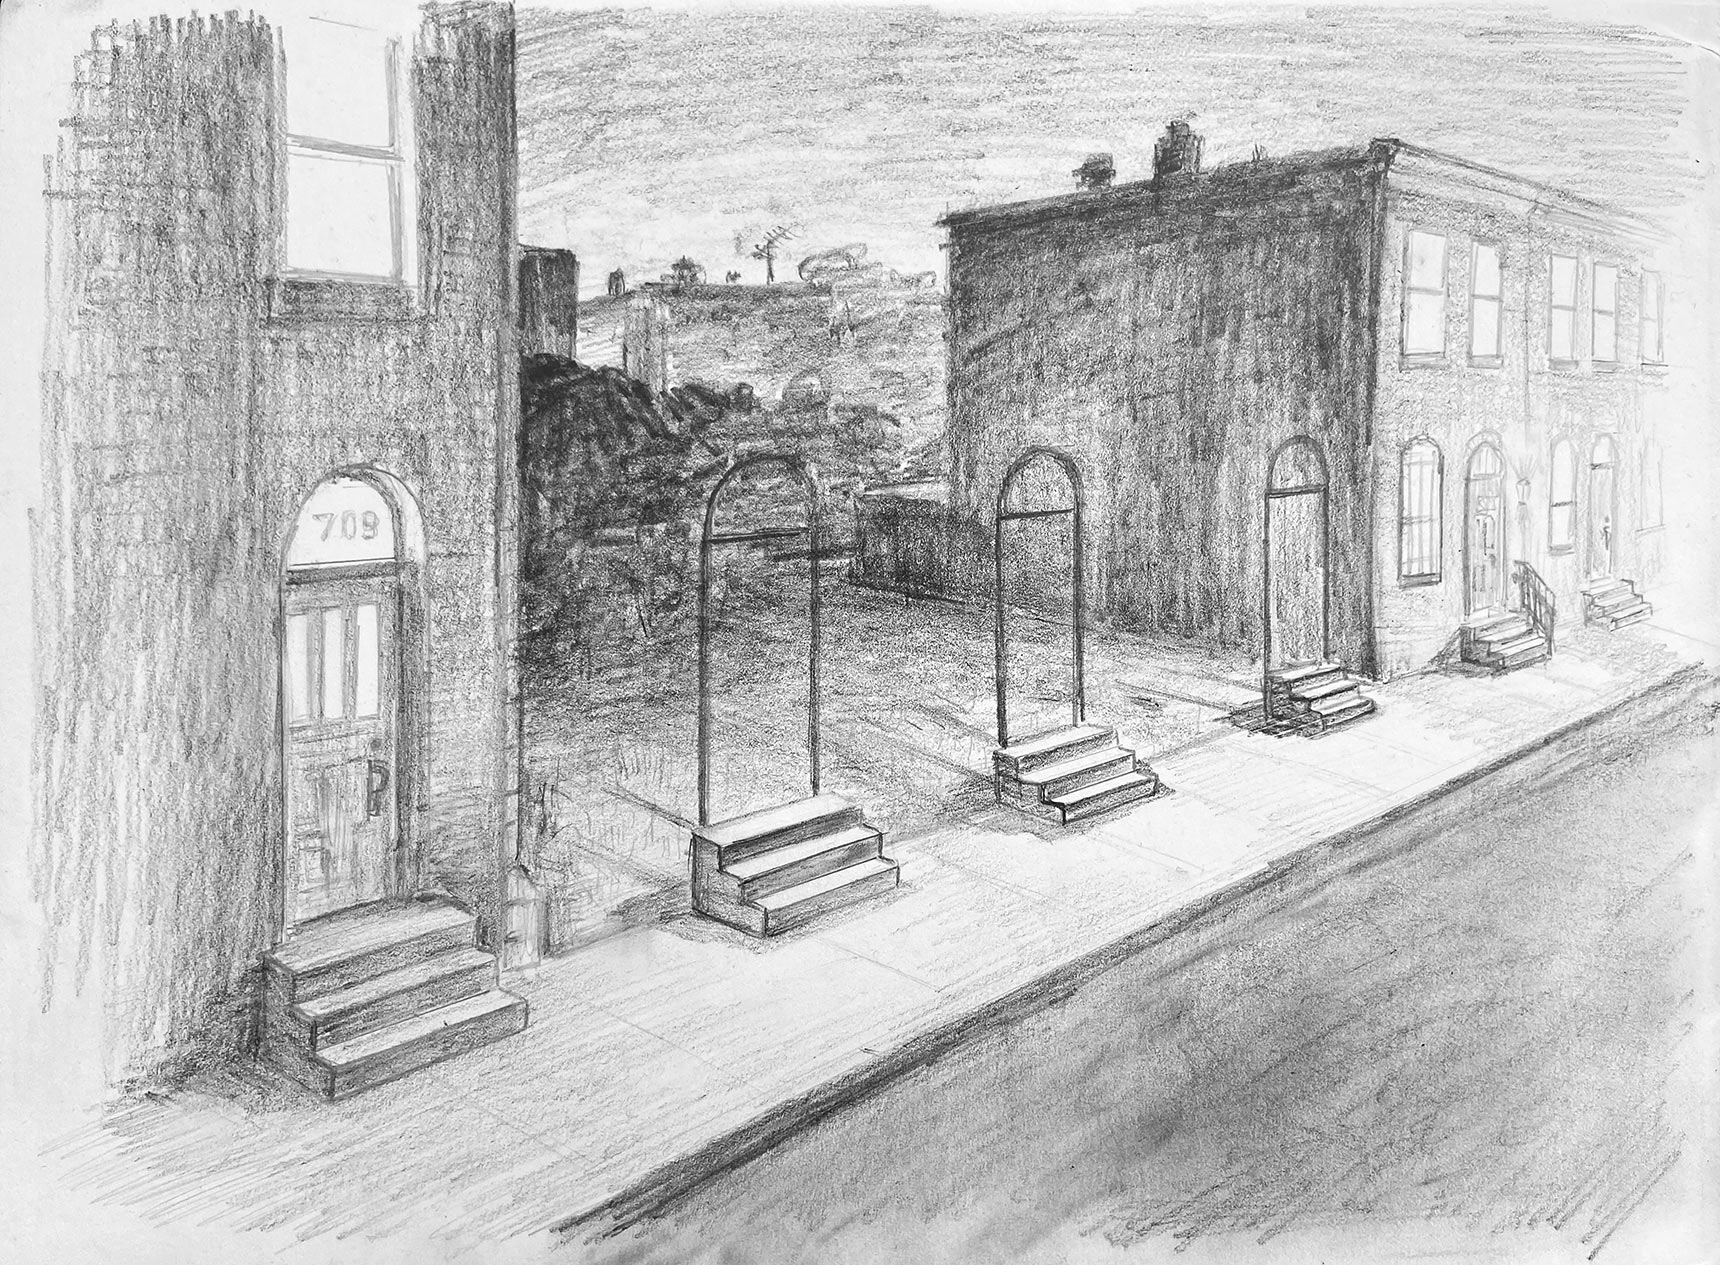 Pencil sketch of the Ghost Stoops public art installation